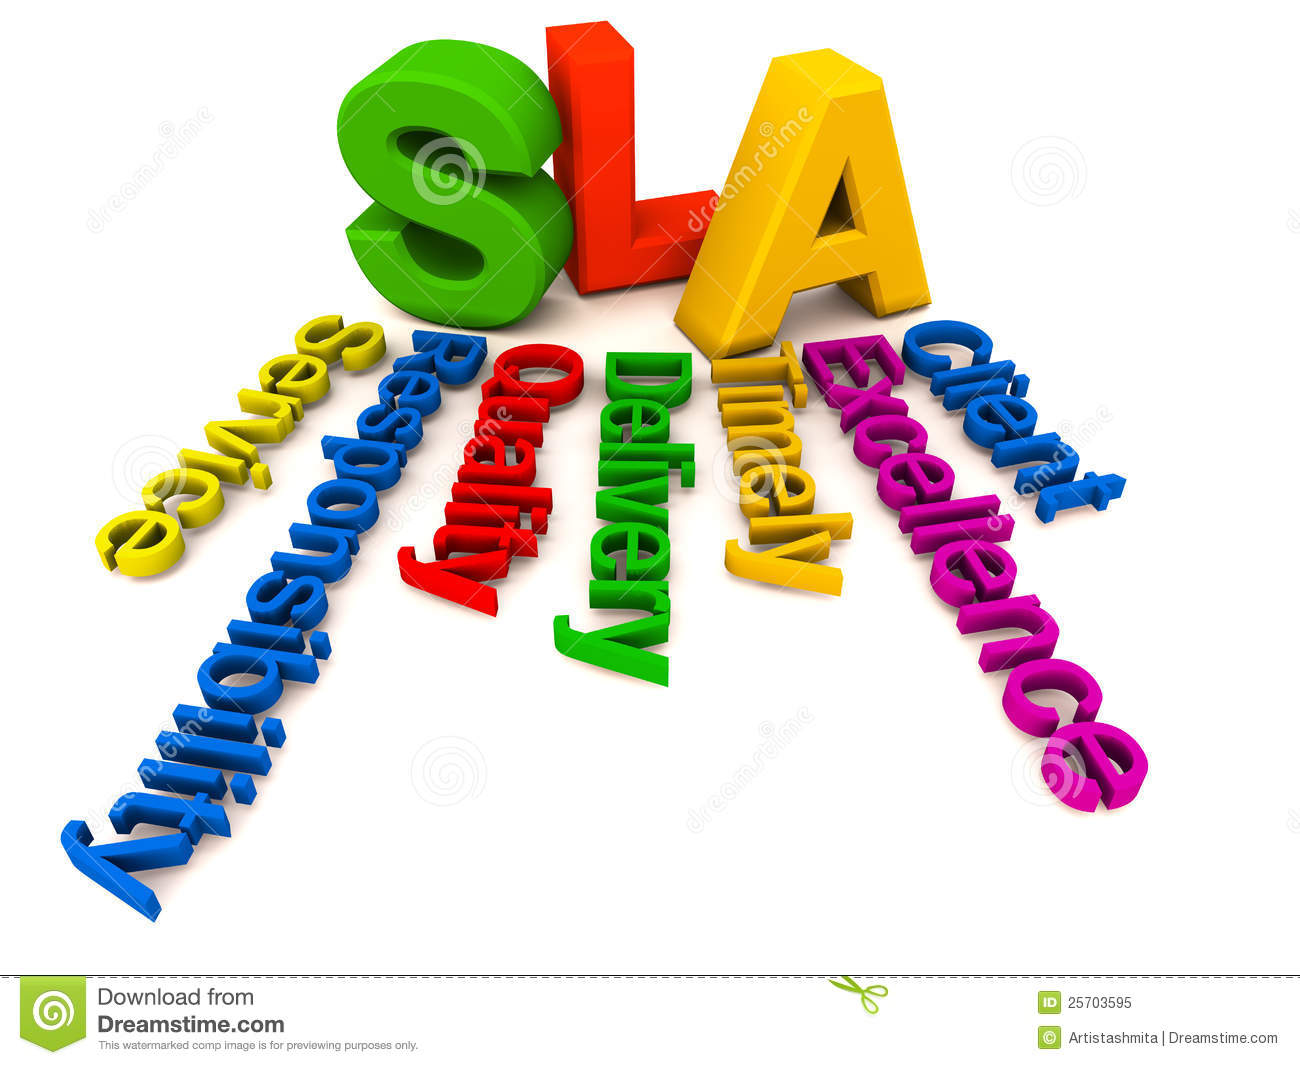 Sla Or Service Level Agreement Collage Of Words Related To Response    